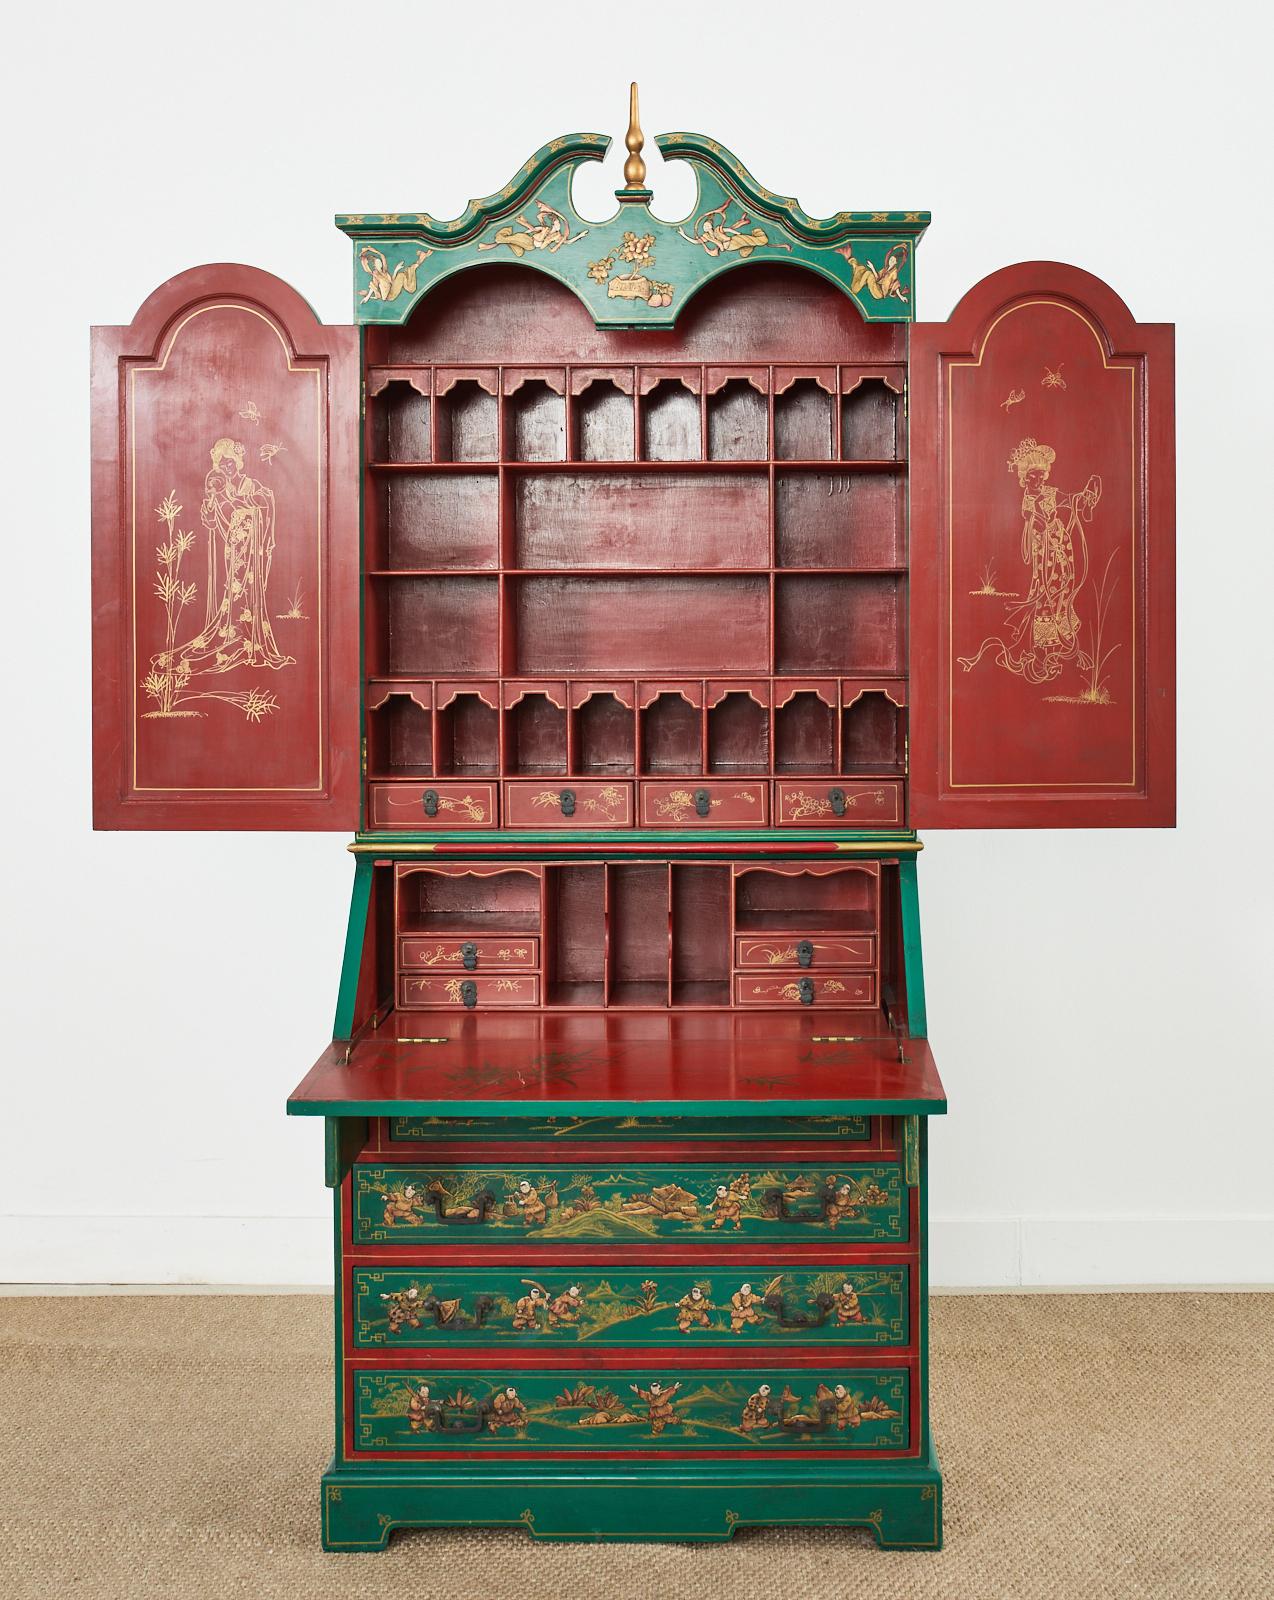 Brilliant English George III style secretaire bookcase featuring a polychrome parcel gilt lacquer finish. The two-part case is decorated in the Chinoiserie revival style with idyllic Asian scenes of figures amid pagoda landscapes engaged in